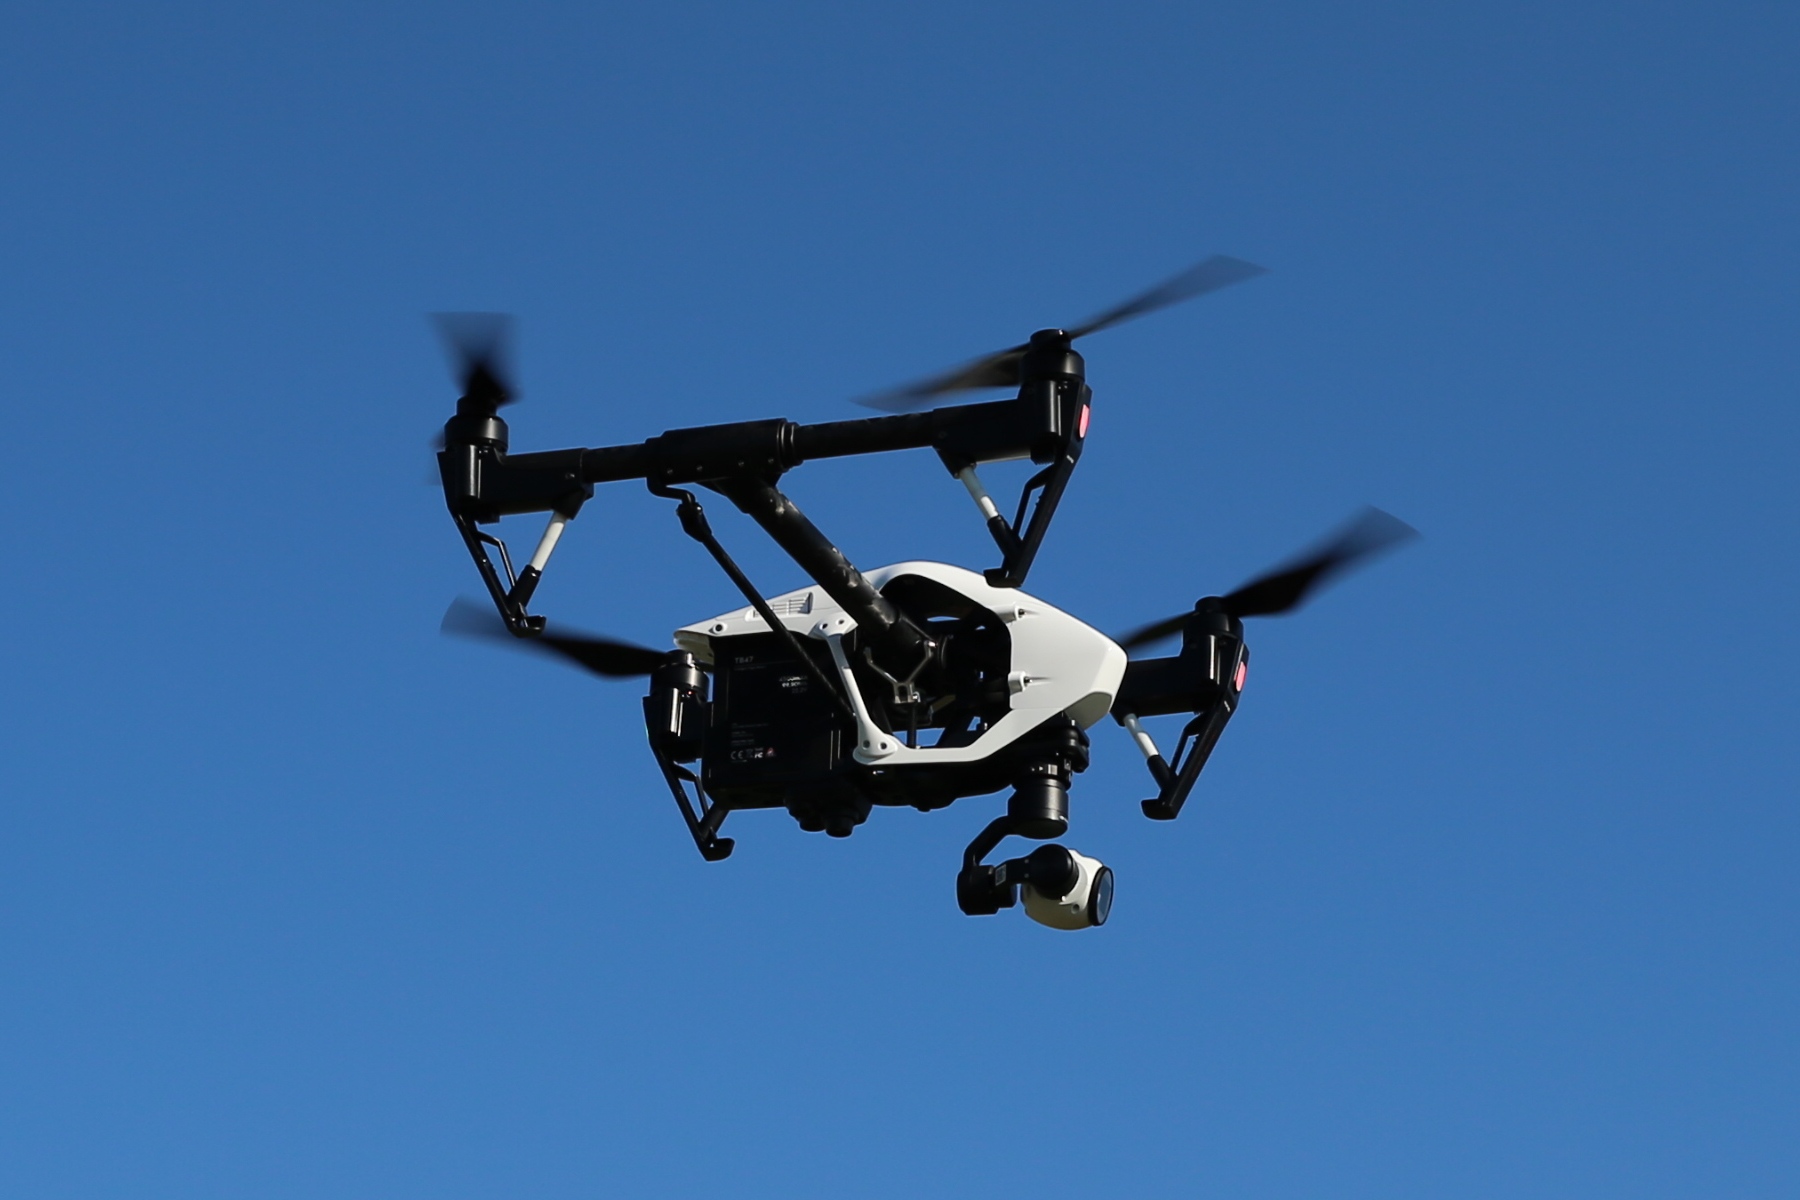 From breaking news to adding cinematics: What drones can add to ...